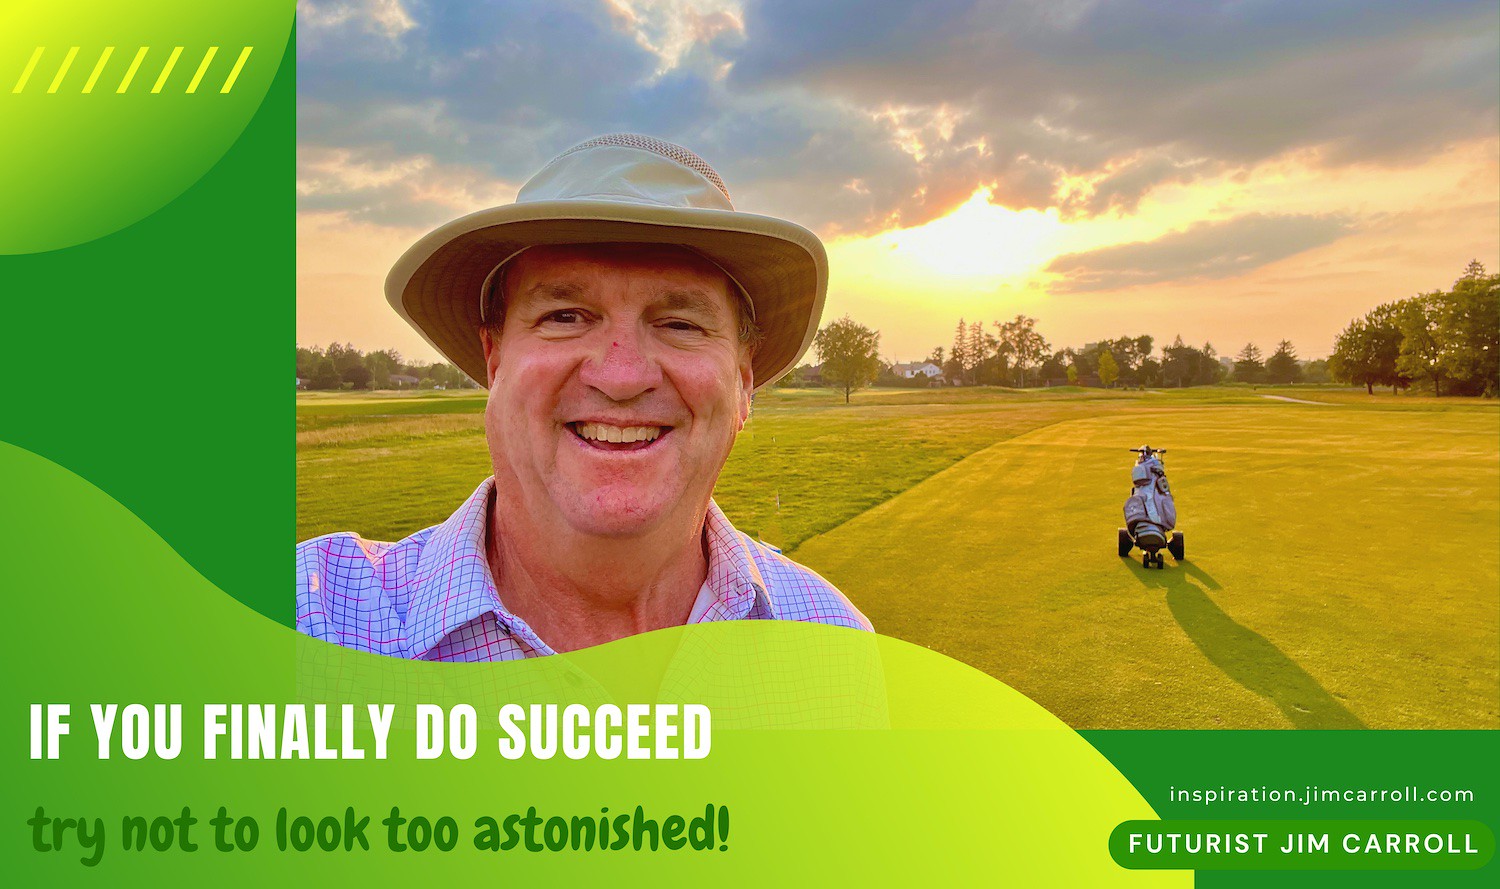 "If you finally do succeed, try not to look too astonished!" - Futurist Jim Carroll